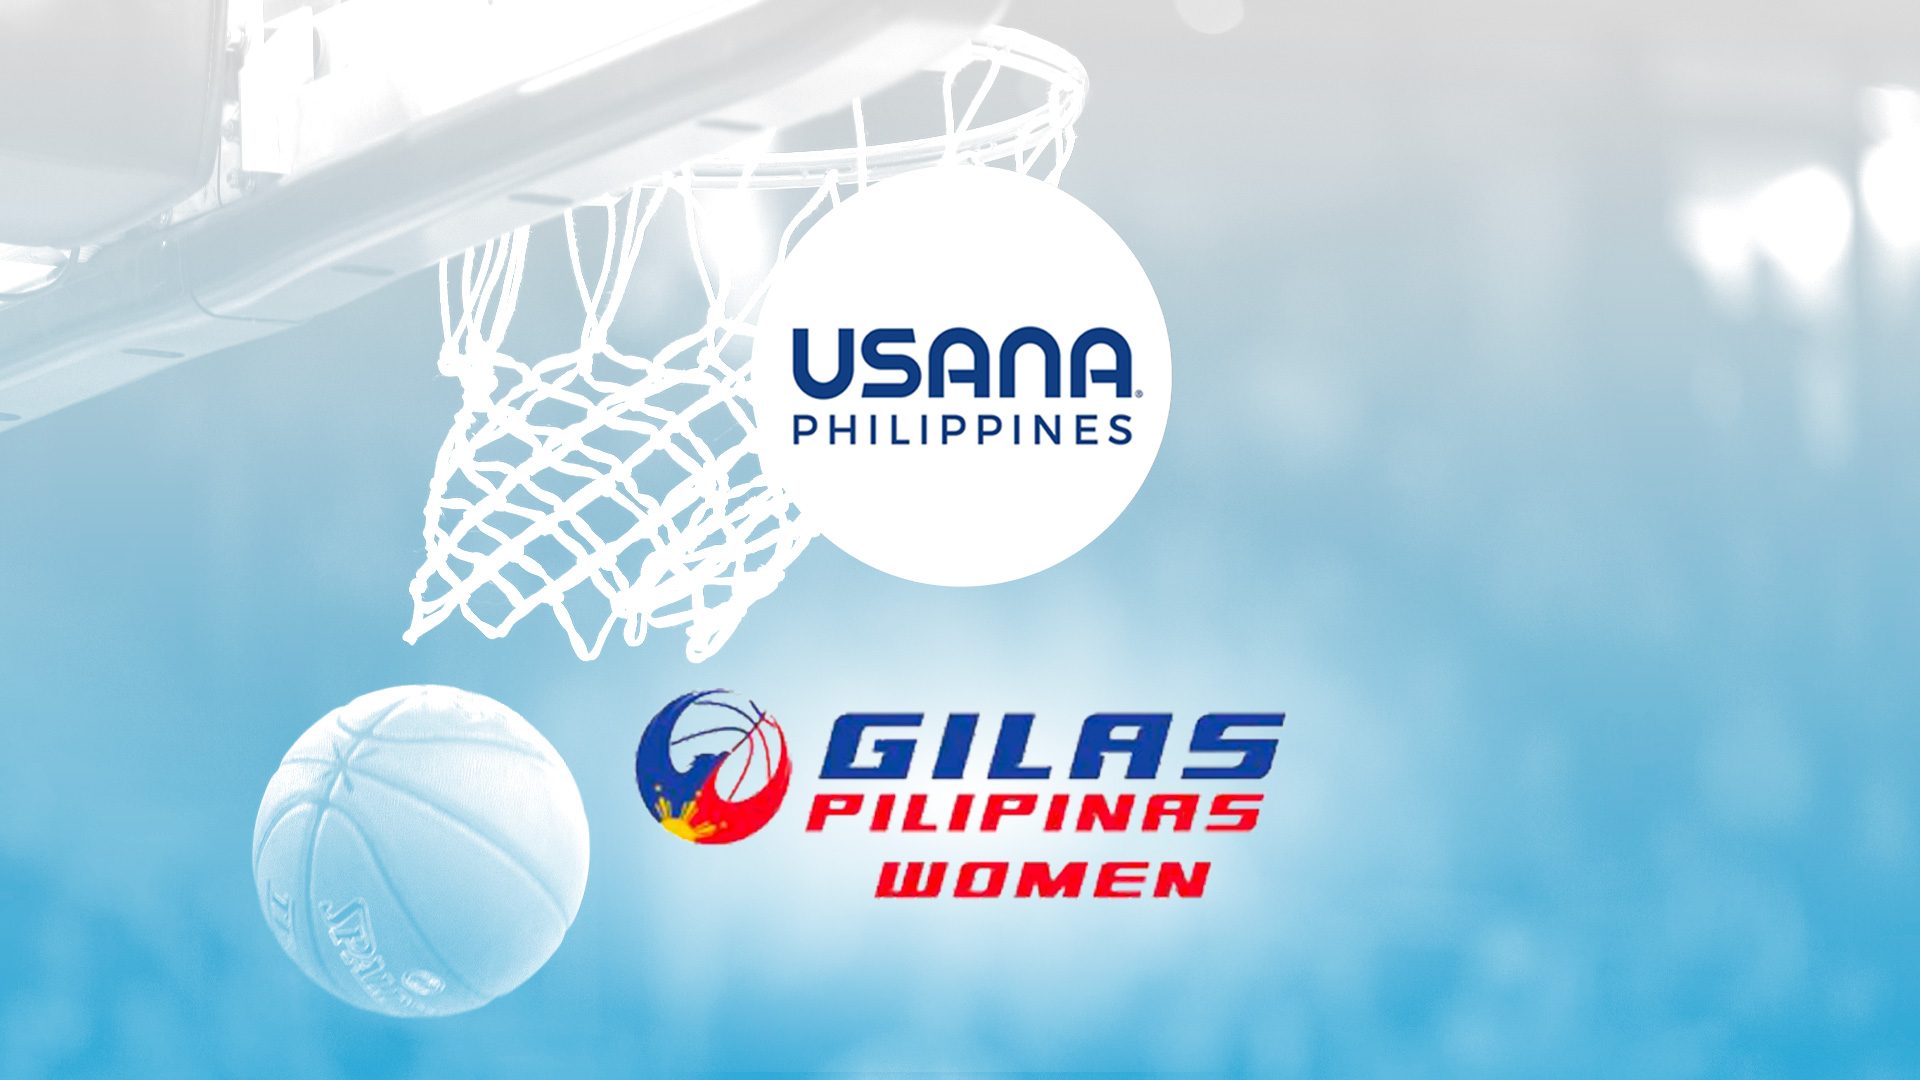 USANA teams up with Gilas Pilipinas Women for health and wellness journey